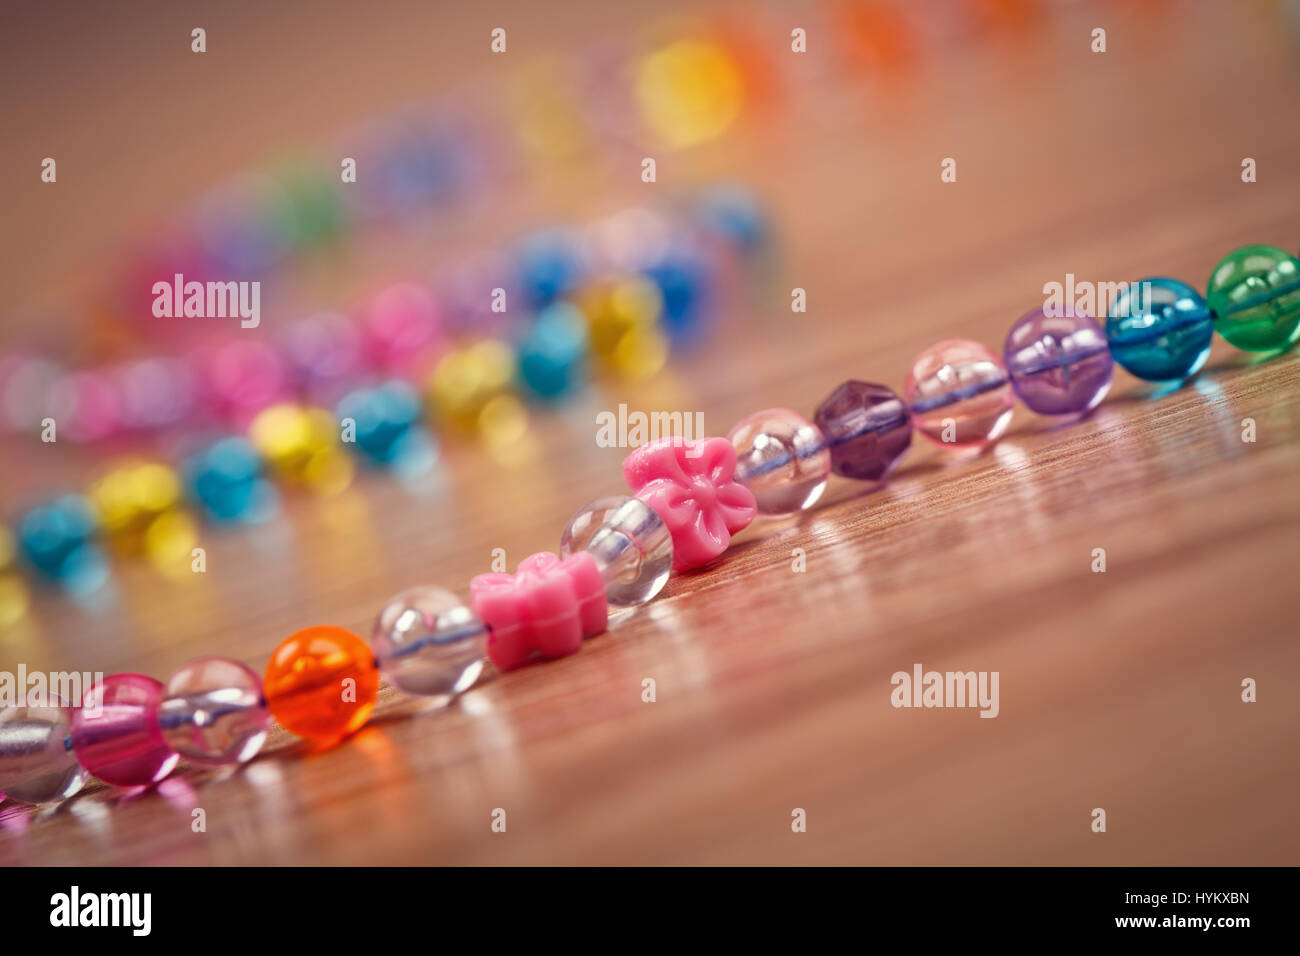 snake of colored beads on a wooden background Stock Photo